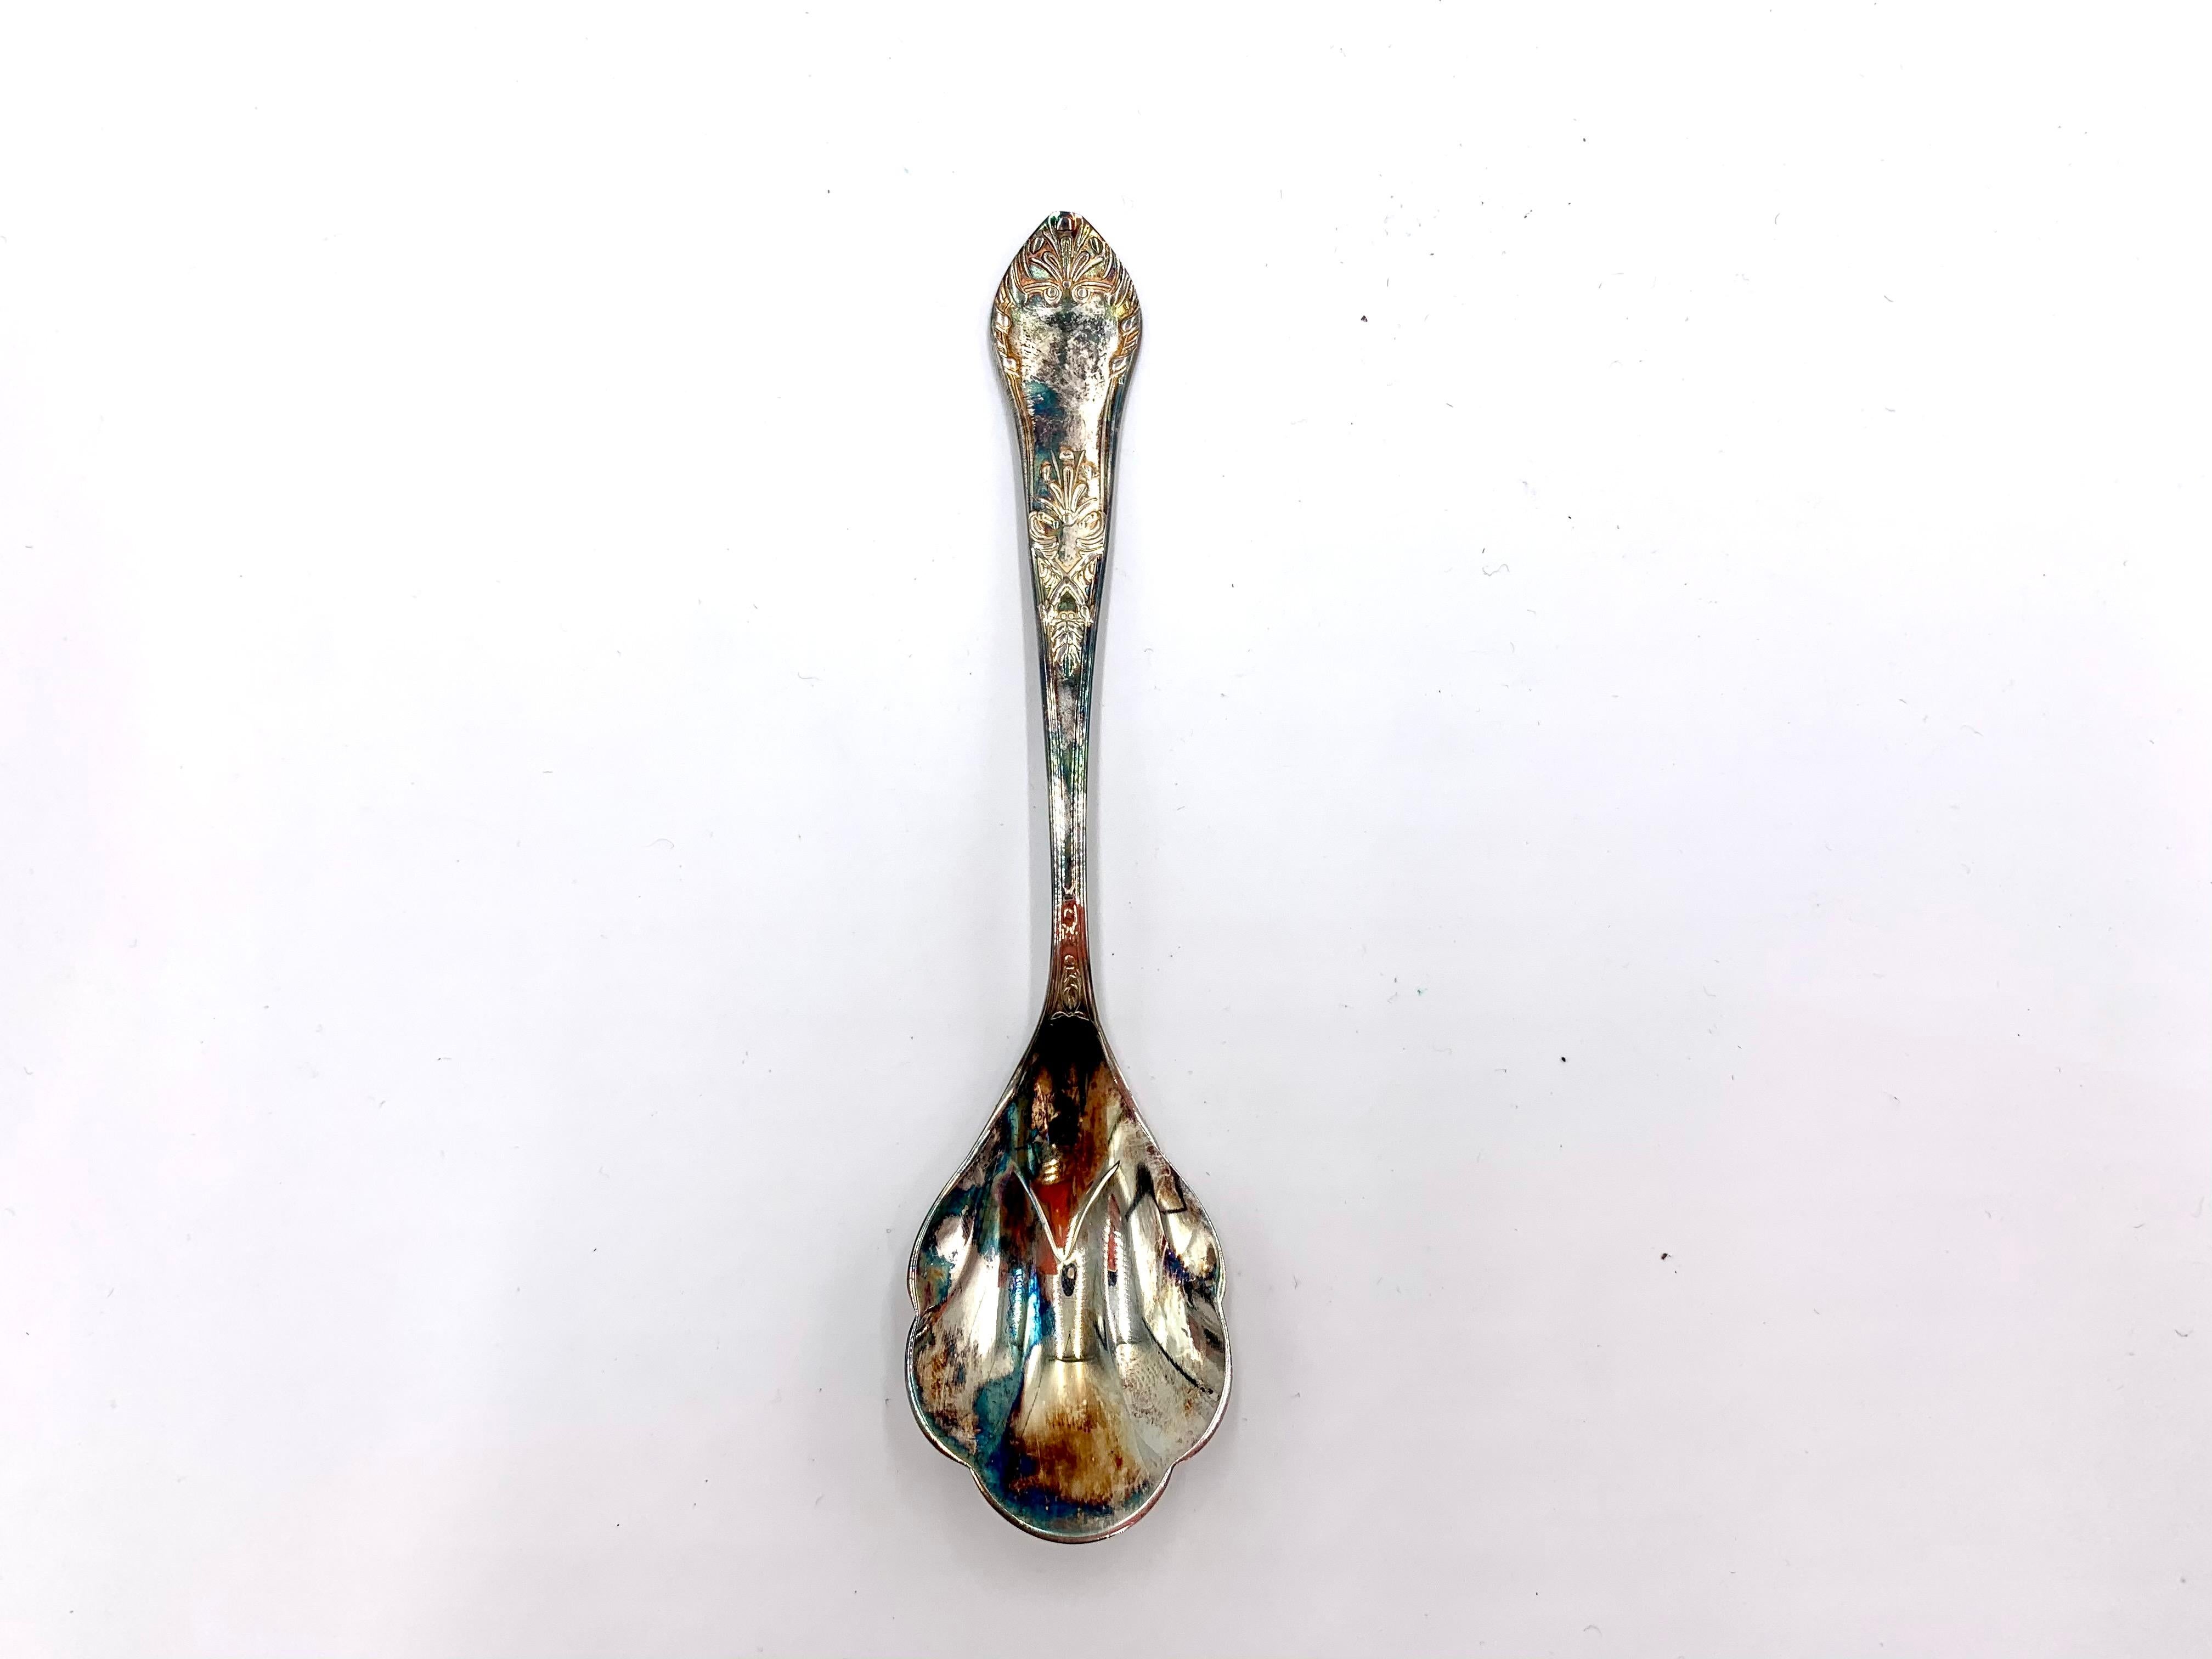 Silver-Plated Sugar Bowl with a Spoon, Fraget Hefra 1